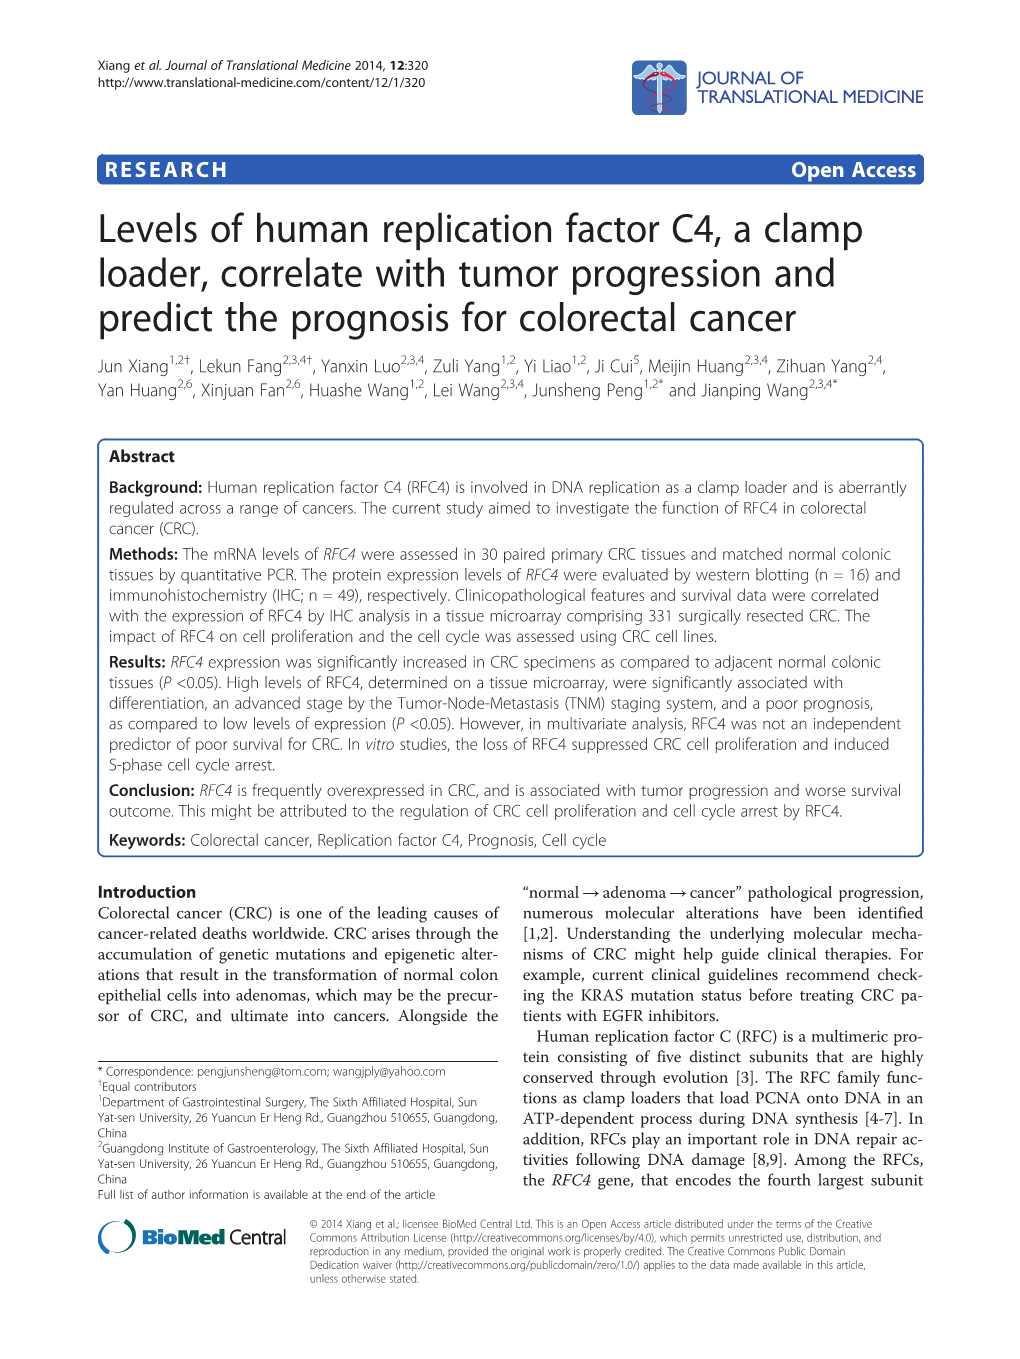 Levels of Human Replication Factor C4, a Clamp Loader, Correlate with Tumor